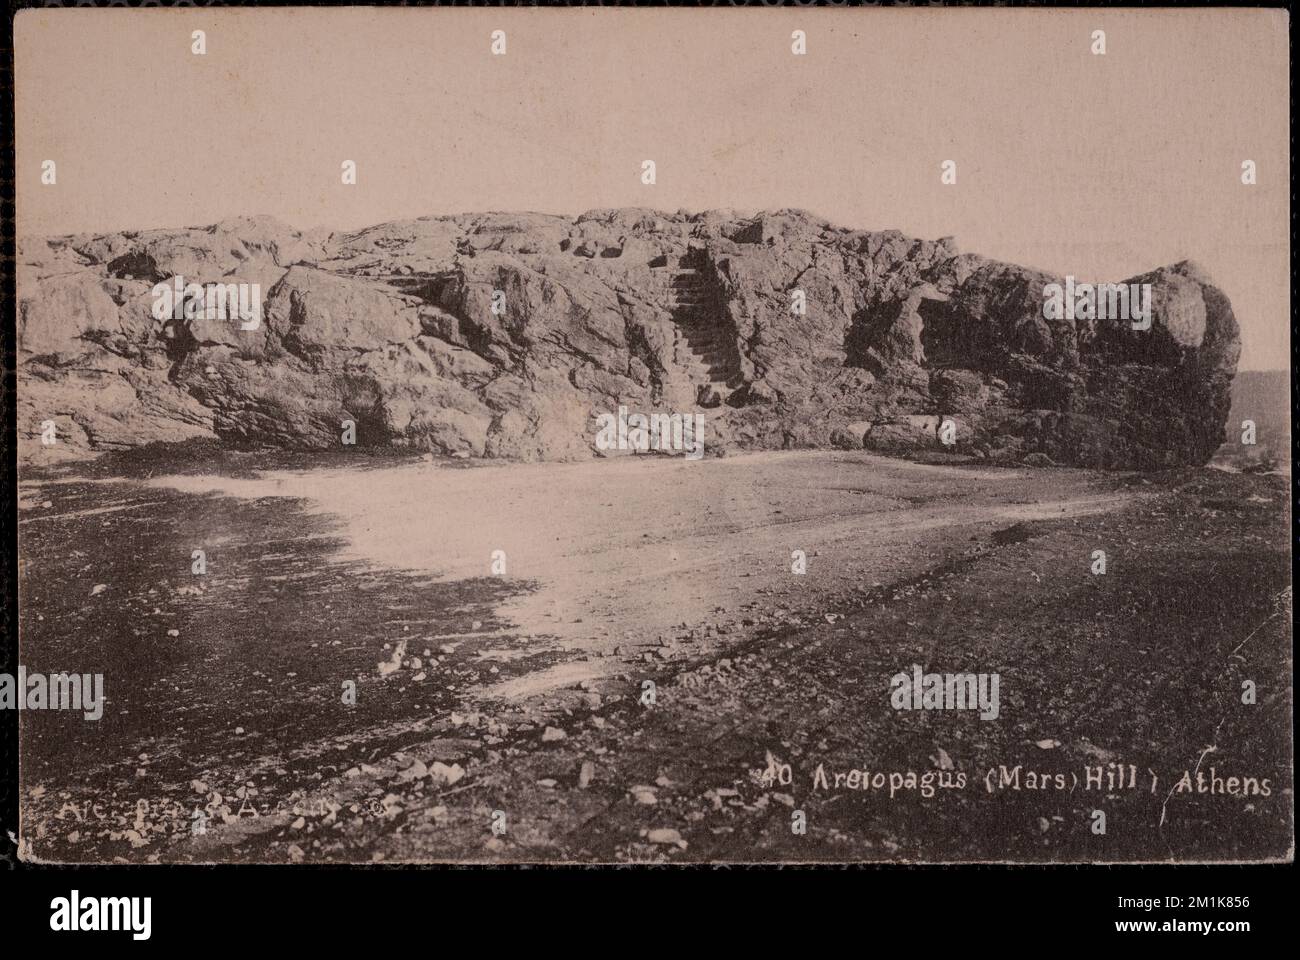 Areiopagus (Mars Hill) Athens , Archaeological sites, Rock formations. Nicholas Catsimpoolas Collection Stock Photo